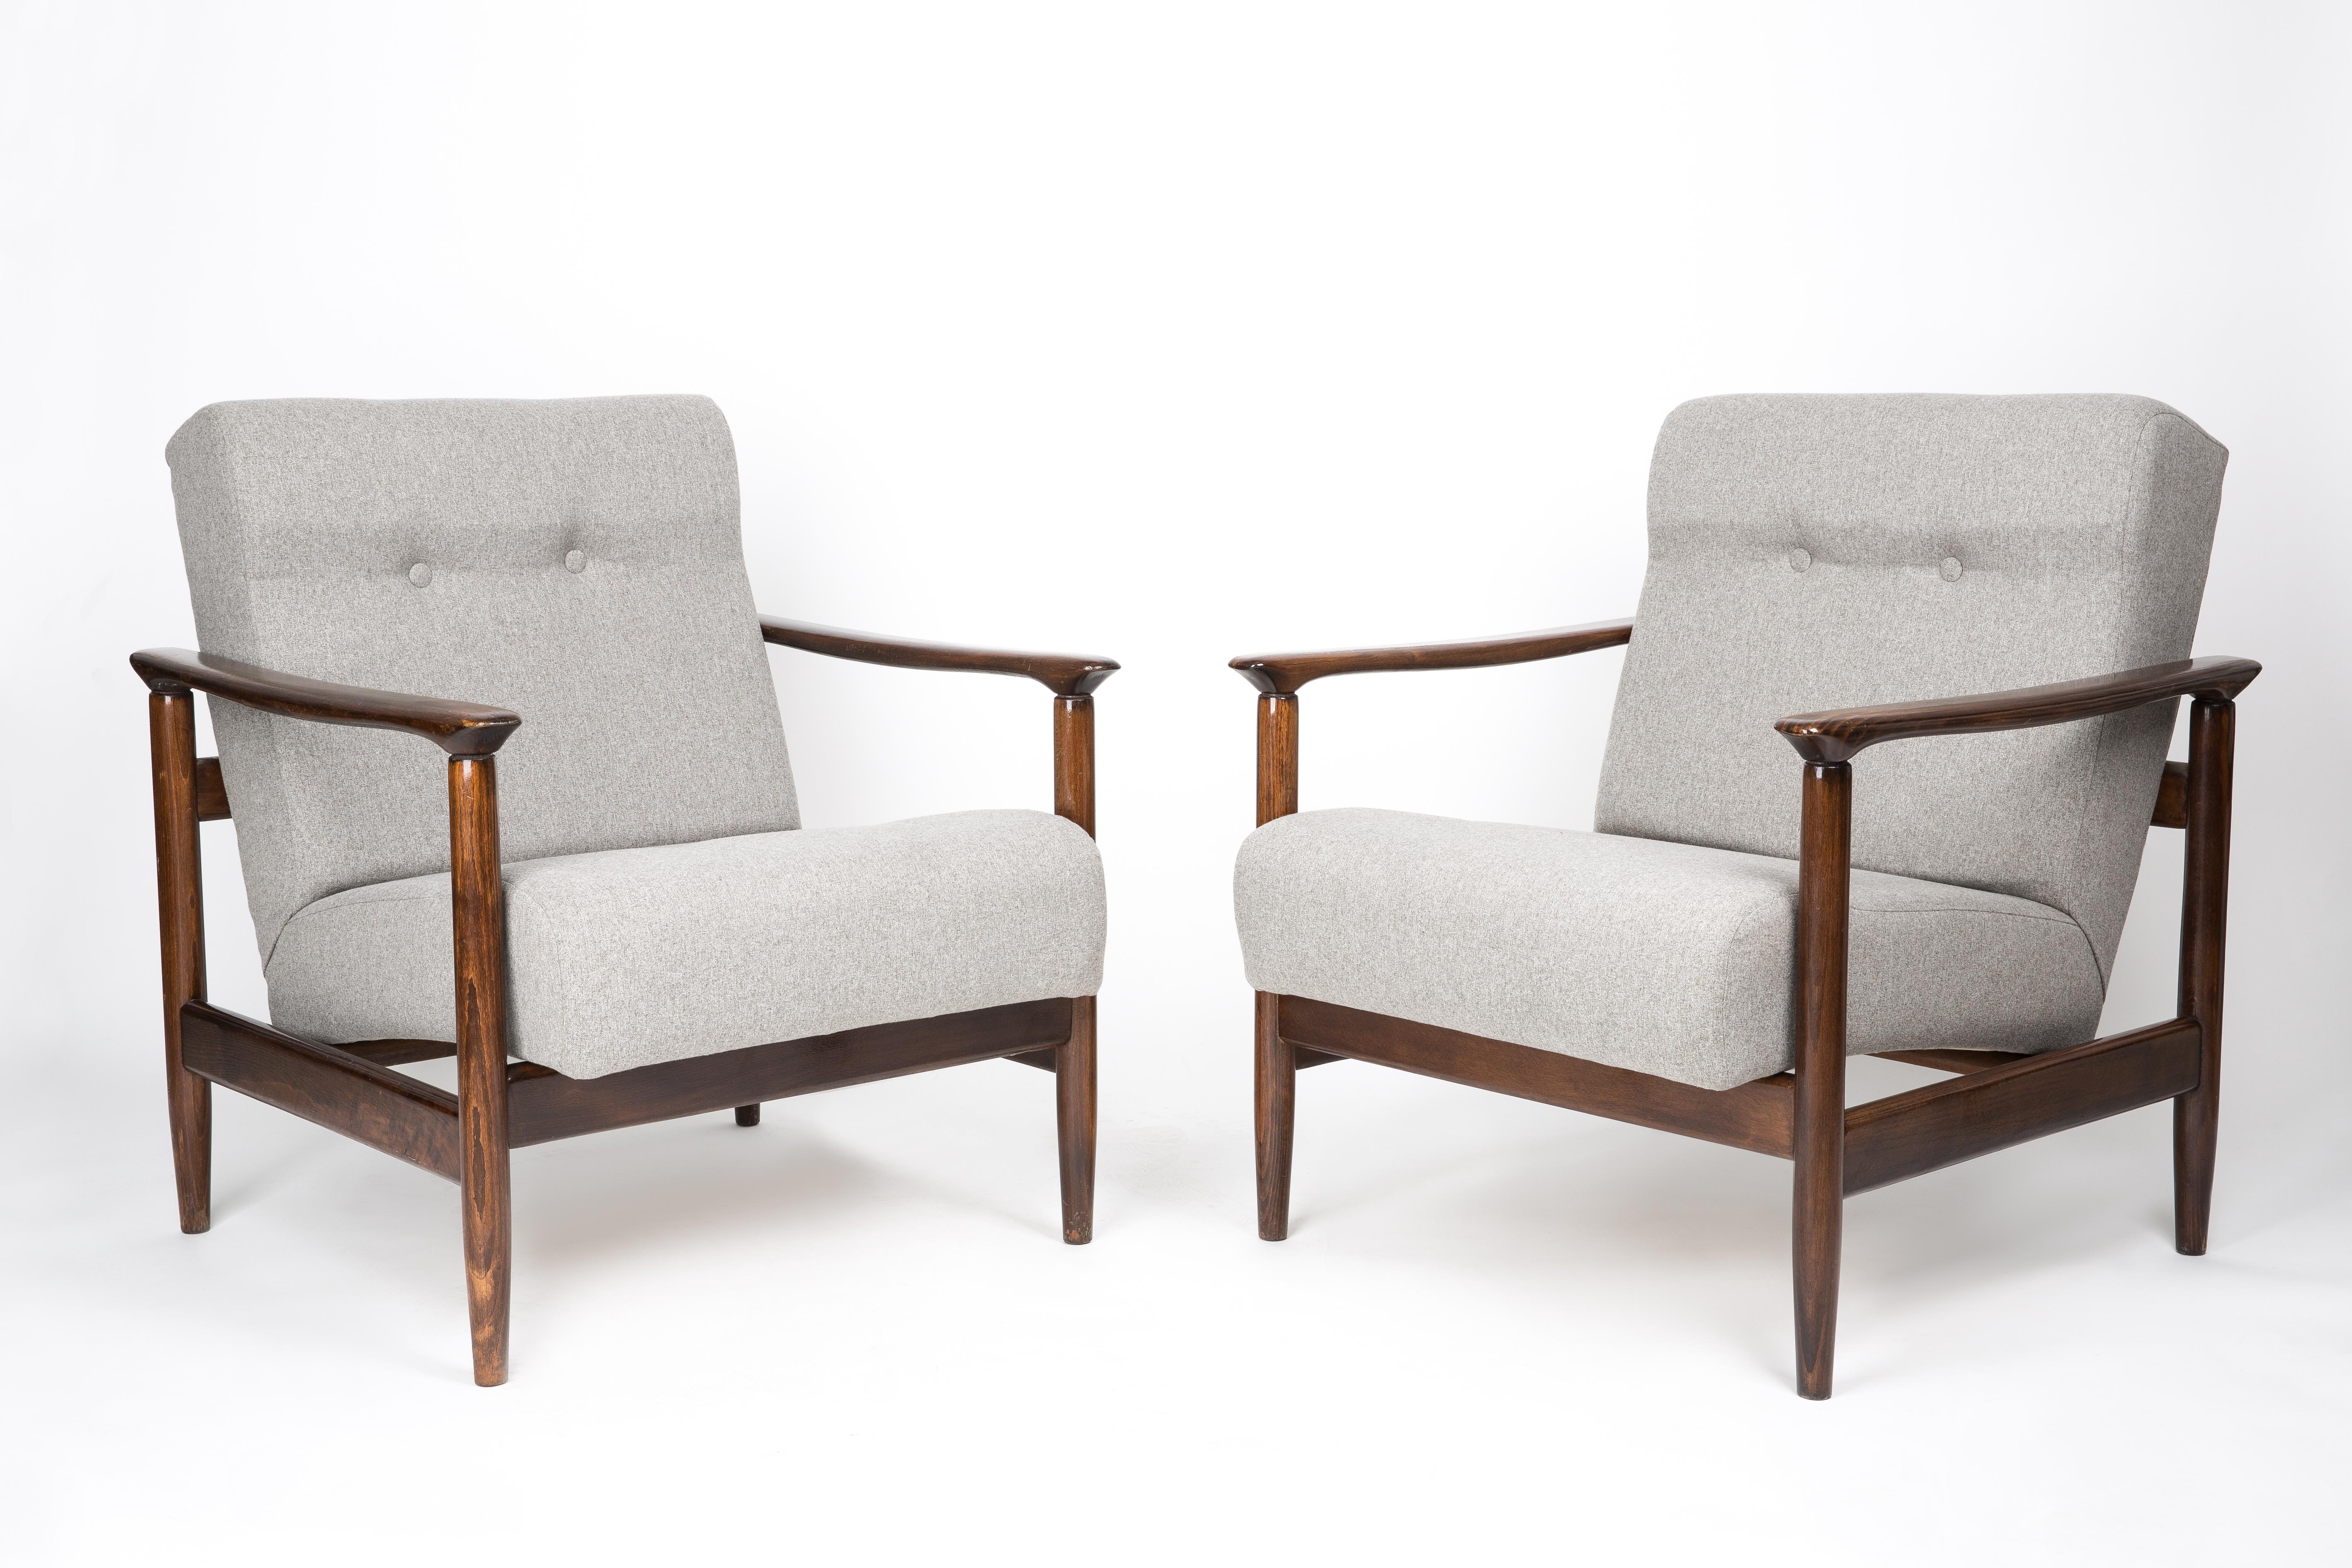 A pair of mid century armchairs GFM-142, designed by Edmund Homa. The armchairs were made in the 1960s in the Gosciecinska Furniture Factory. They are made from solid beech wood. The GFM-142 armchair is regarded one of the best Polish armchair